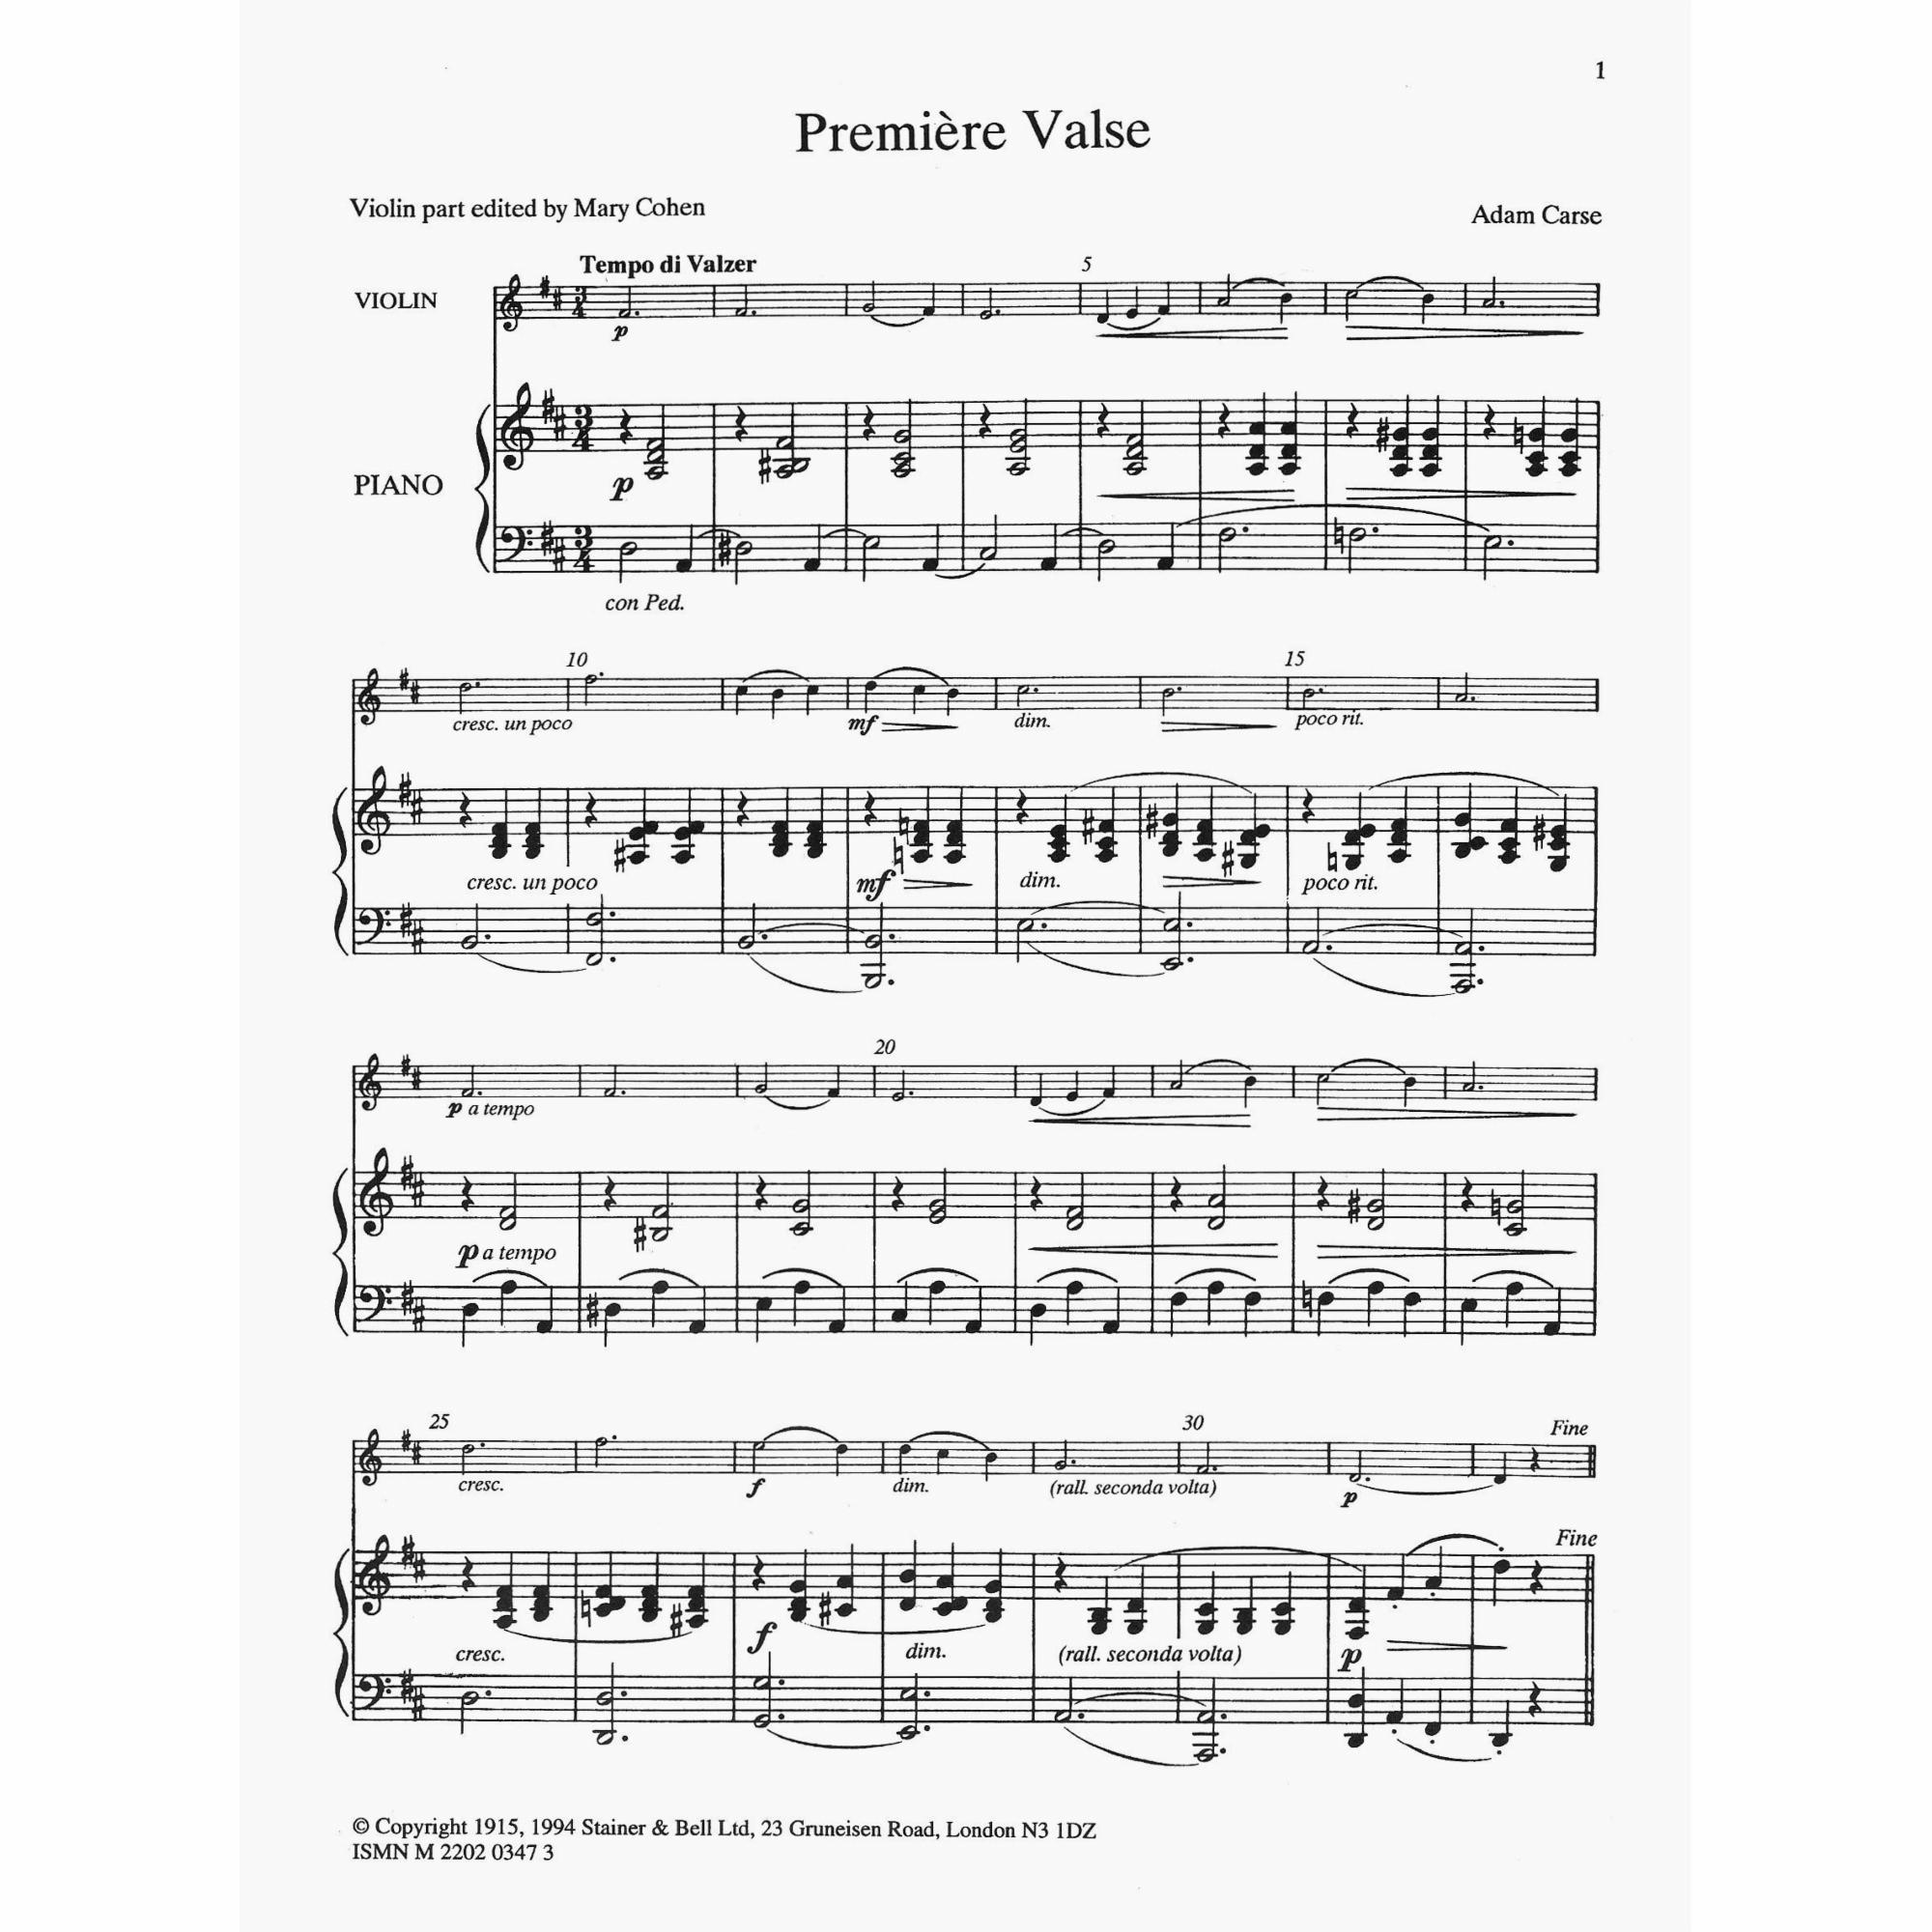 Sample: Book One, Piano Part